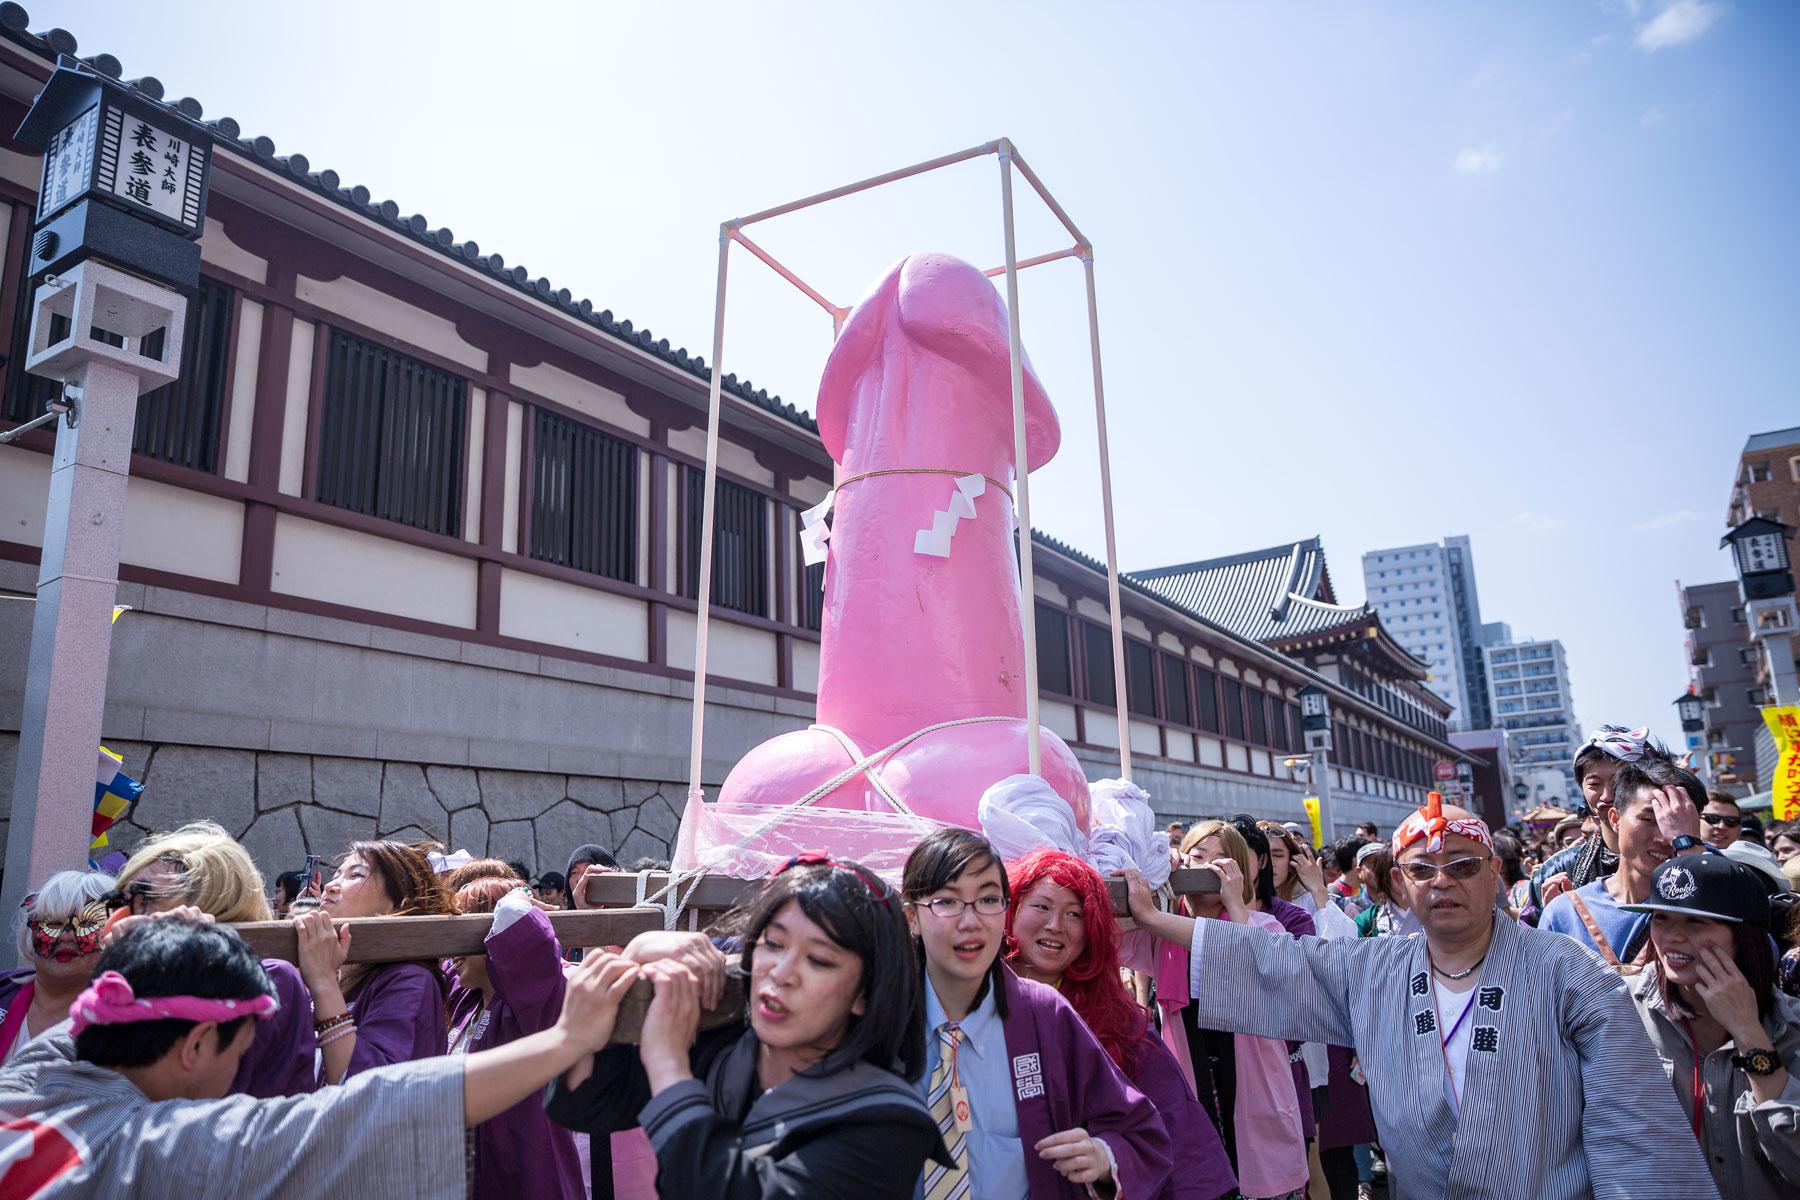 A parade of people holding a giant pink penis